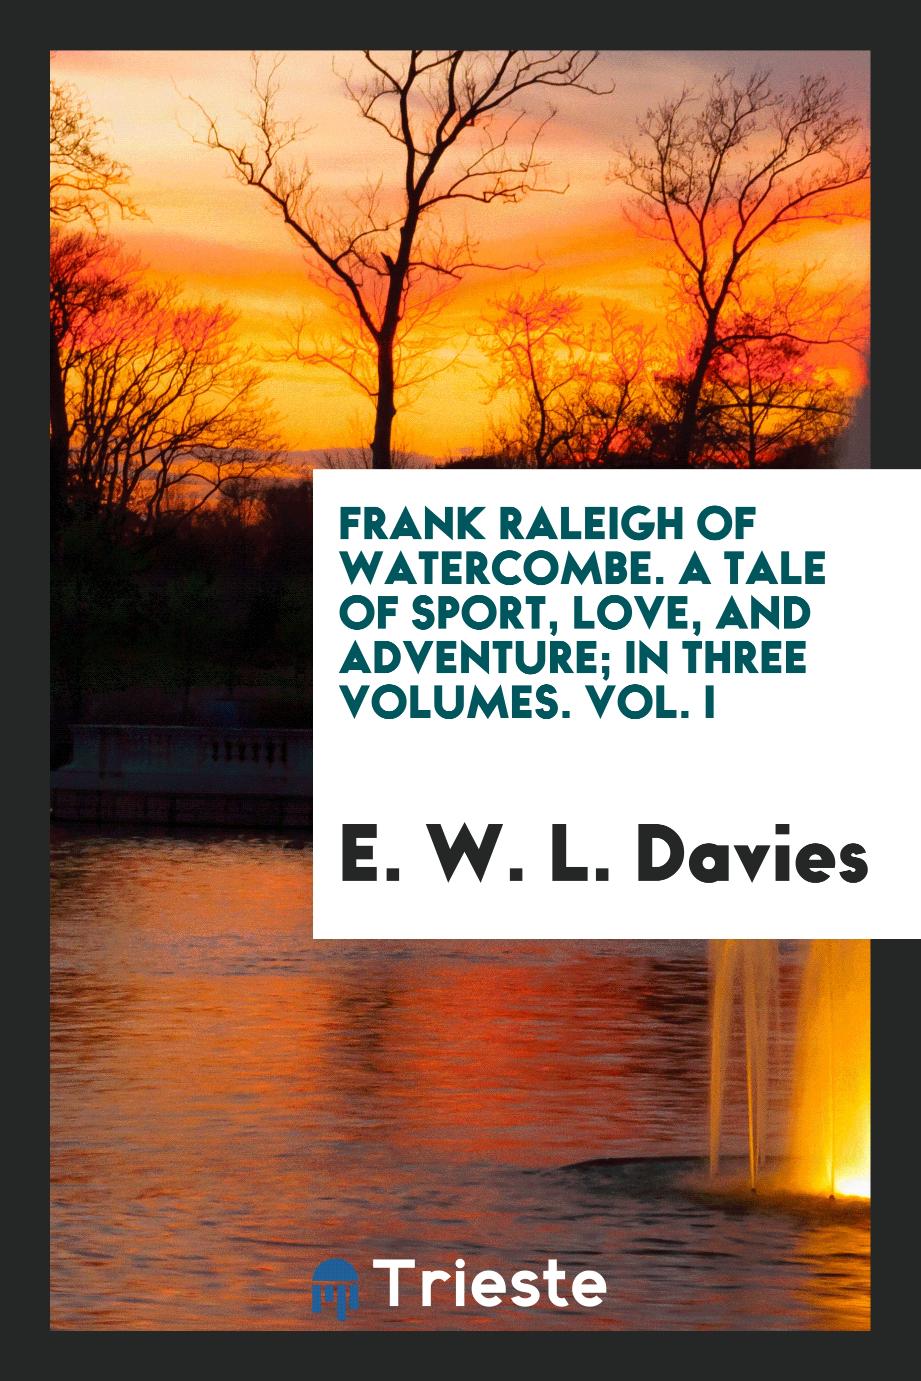 Frank Raleigh of Watercombe. A tale of sport, love, and adventure; In three volumes. Vol. I